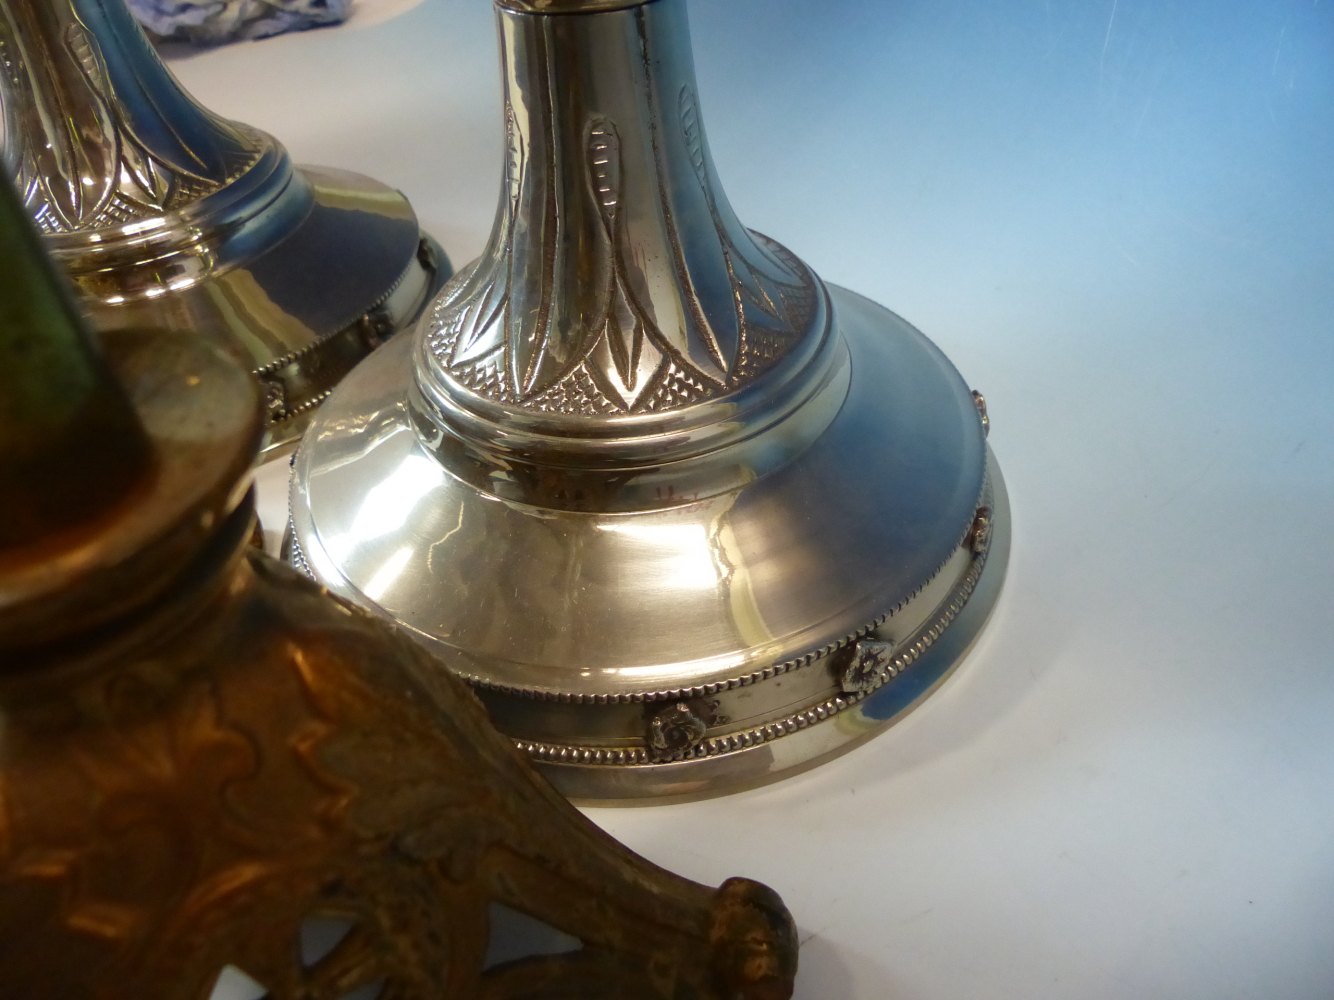 A PAIR OF NEOGOTHIC SILVERED PRICKET CANDLESTICKS. H 48.5cms. A PAIR OF PARCEL GOLD PAINTED BRASS - Image 6 of 6